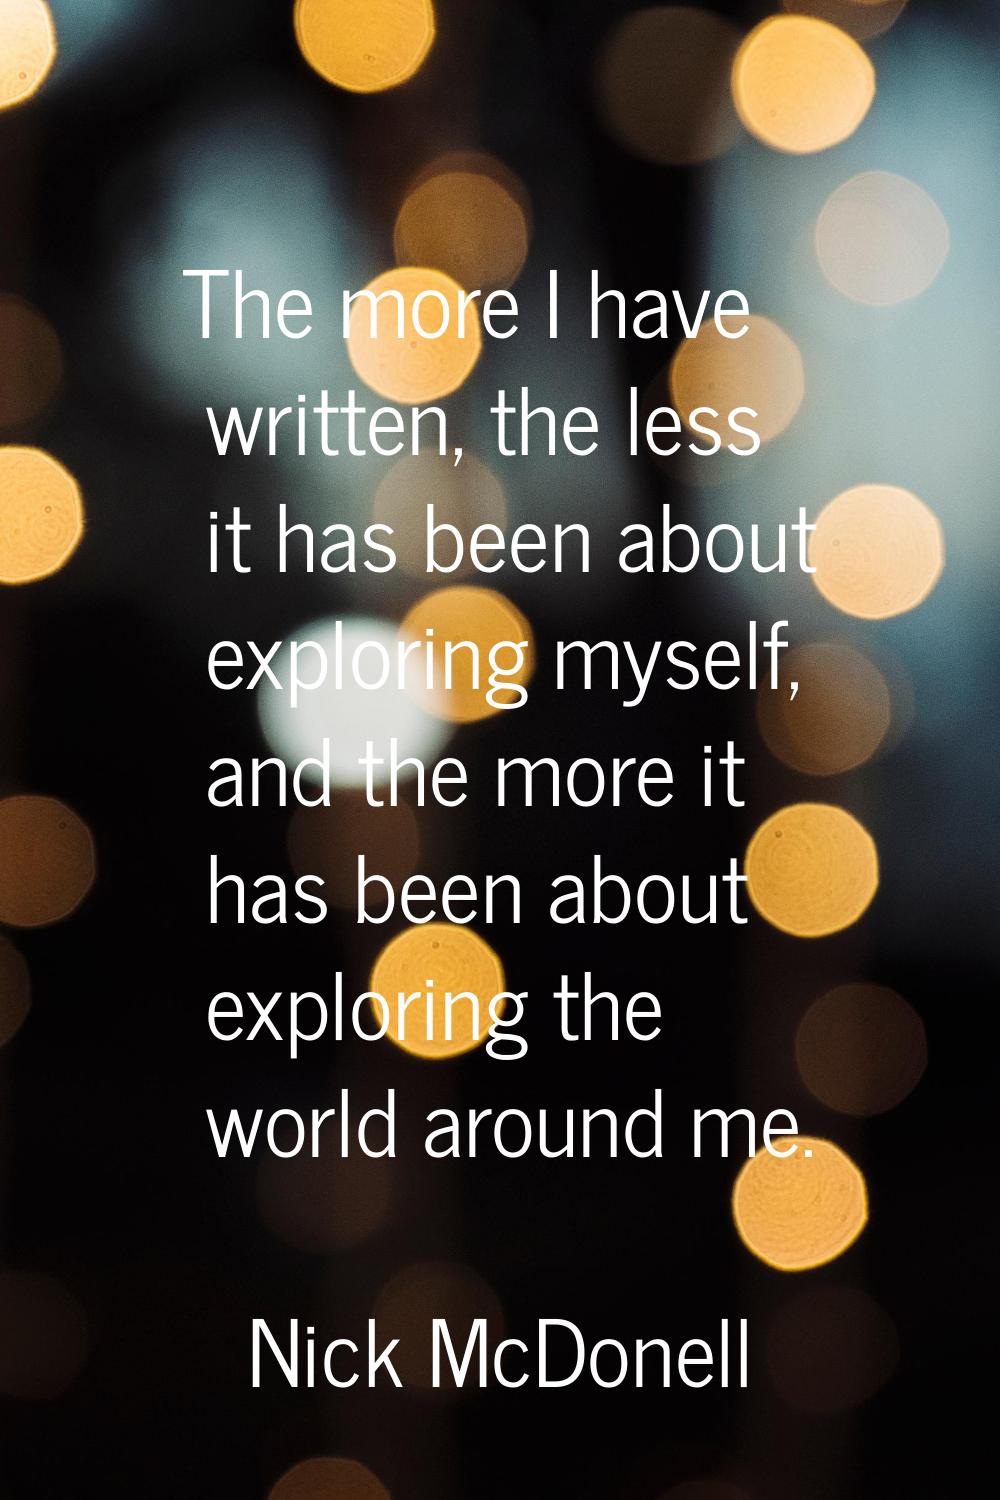 The more I have written, the less it has been about exploring myself, and the more it has been abou